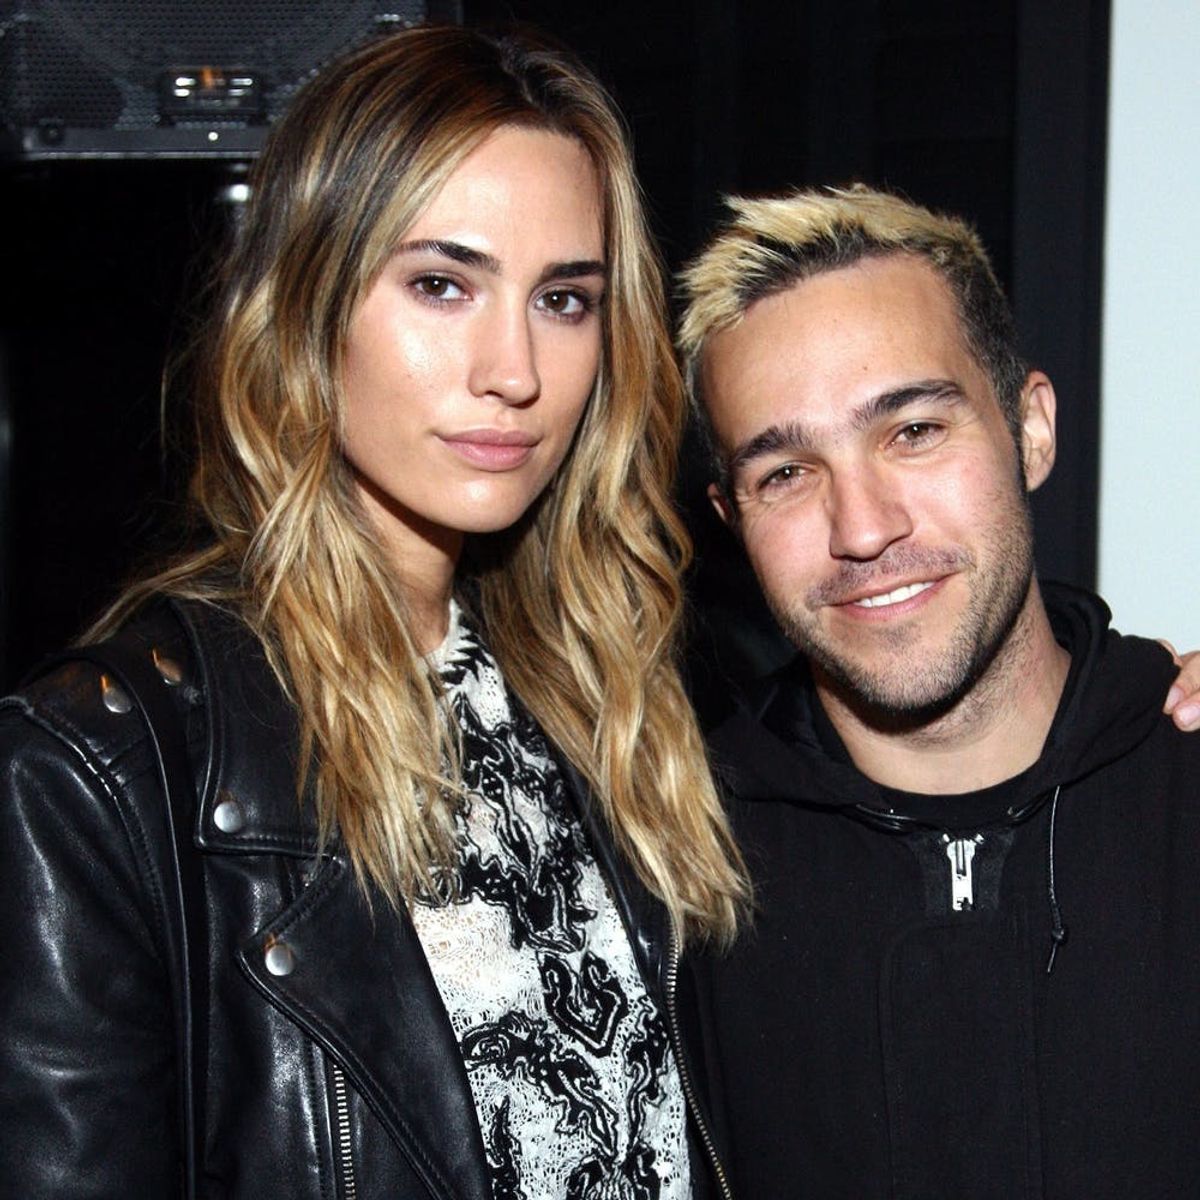 Pete Wentz and Girlfriend Meagan Camper Are Expecting a Baby Girl!